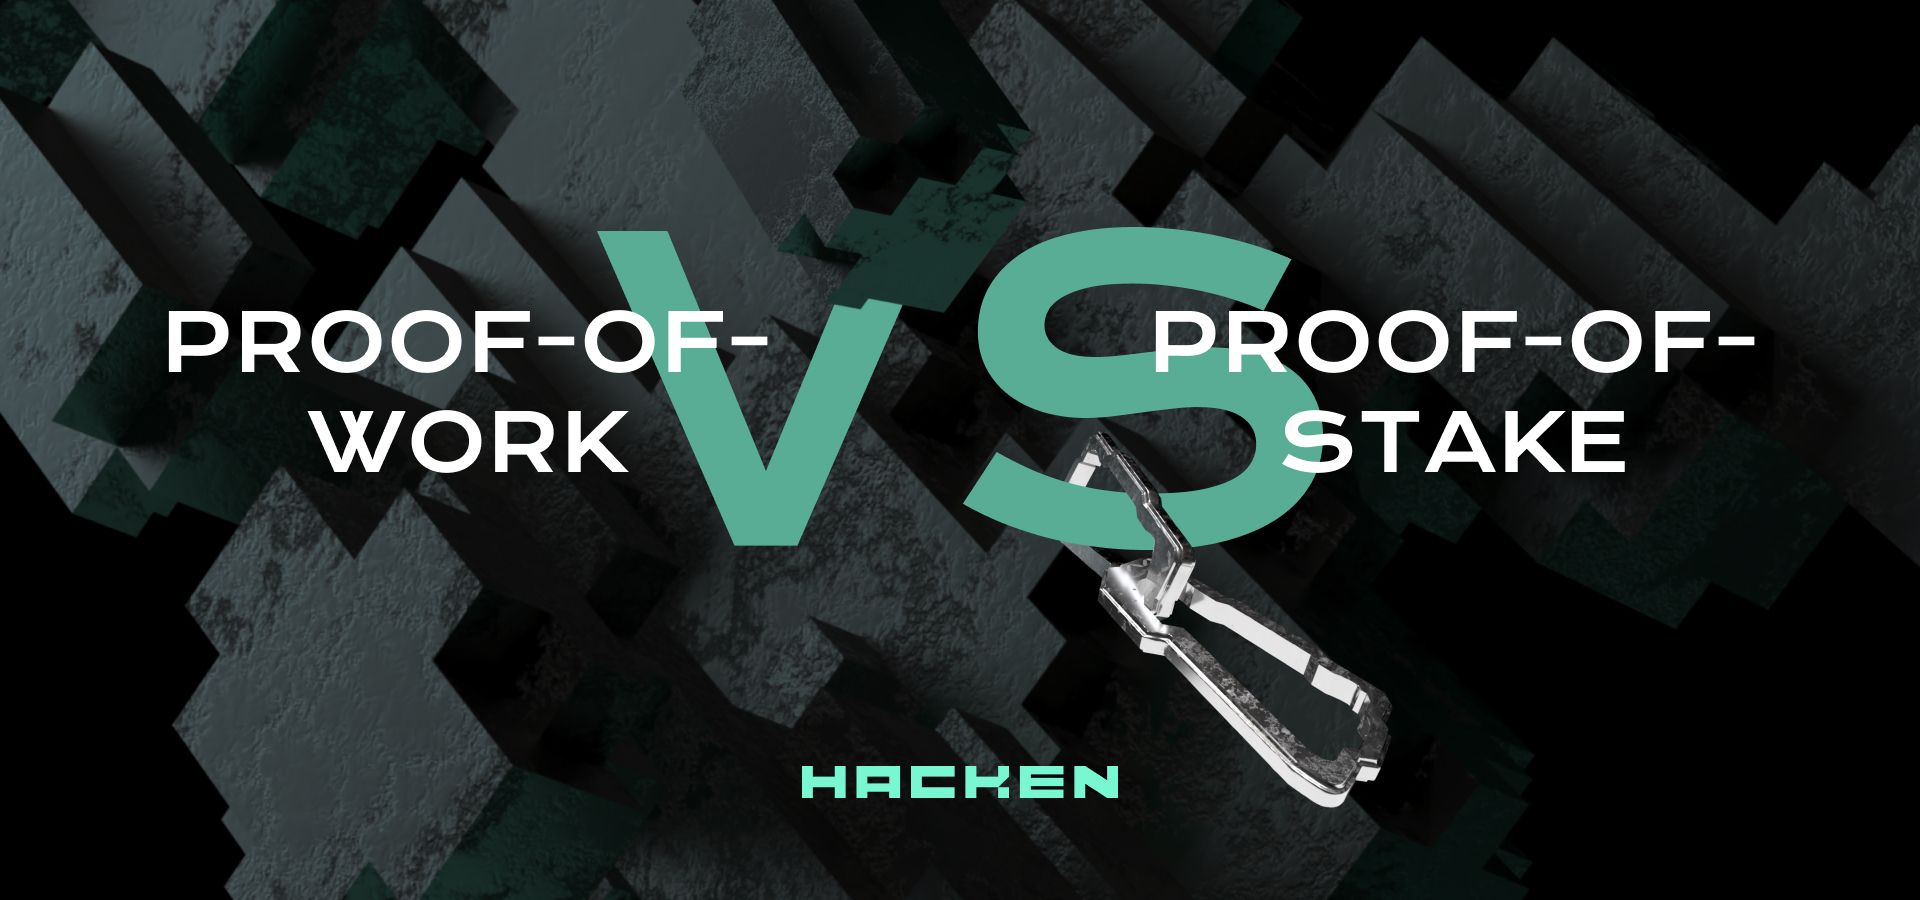 Proof of Work vs Proof of Stake